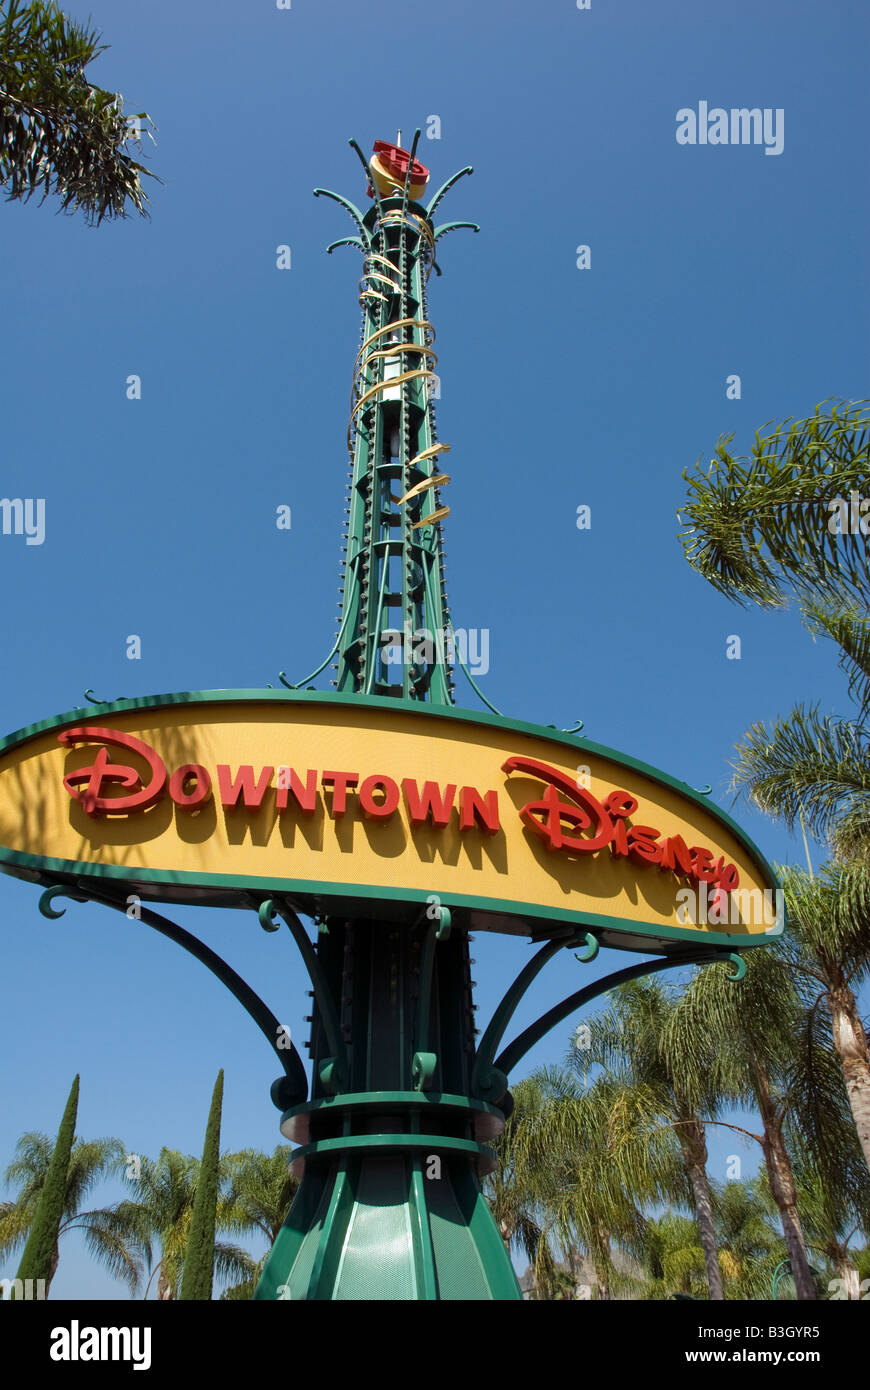 Downtown Disney welcome sign Disneyland Anaheim usa palm trees looking up Stock Photo